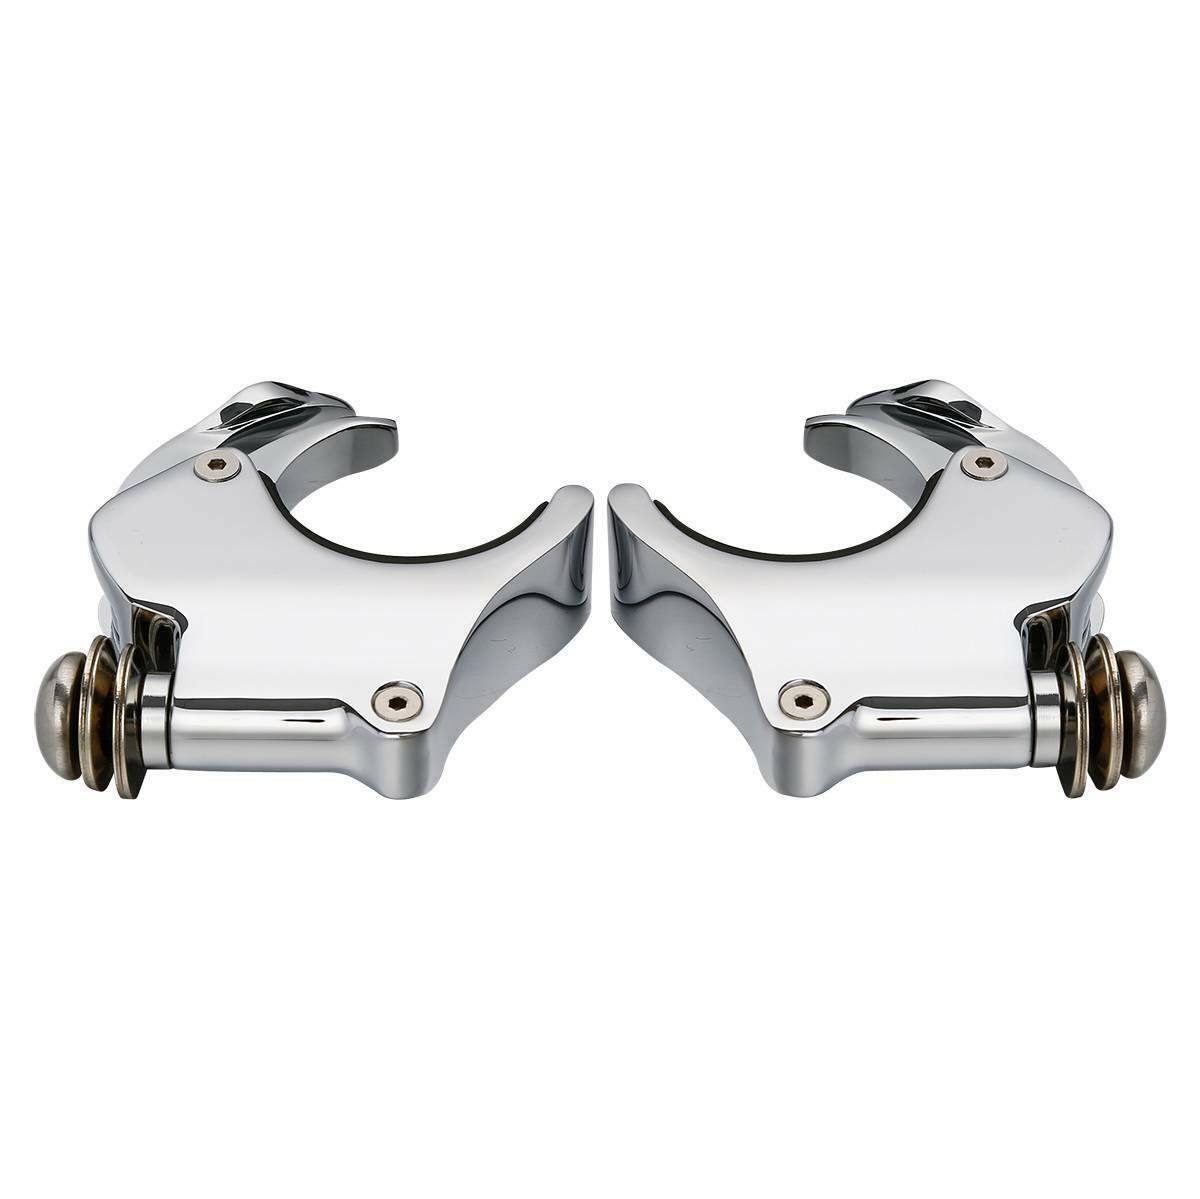 41mm Windshield Clamps Fit For Harley Dyna Wide Glide 93-05 Softail 88-13 Chrome - Moto Life Products